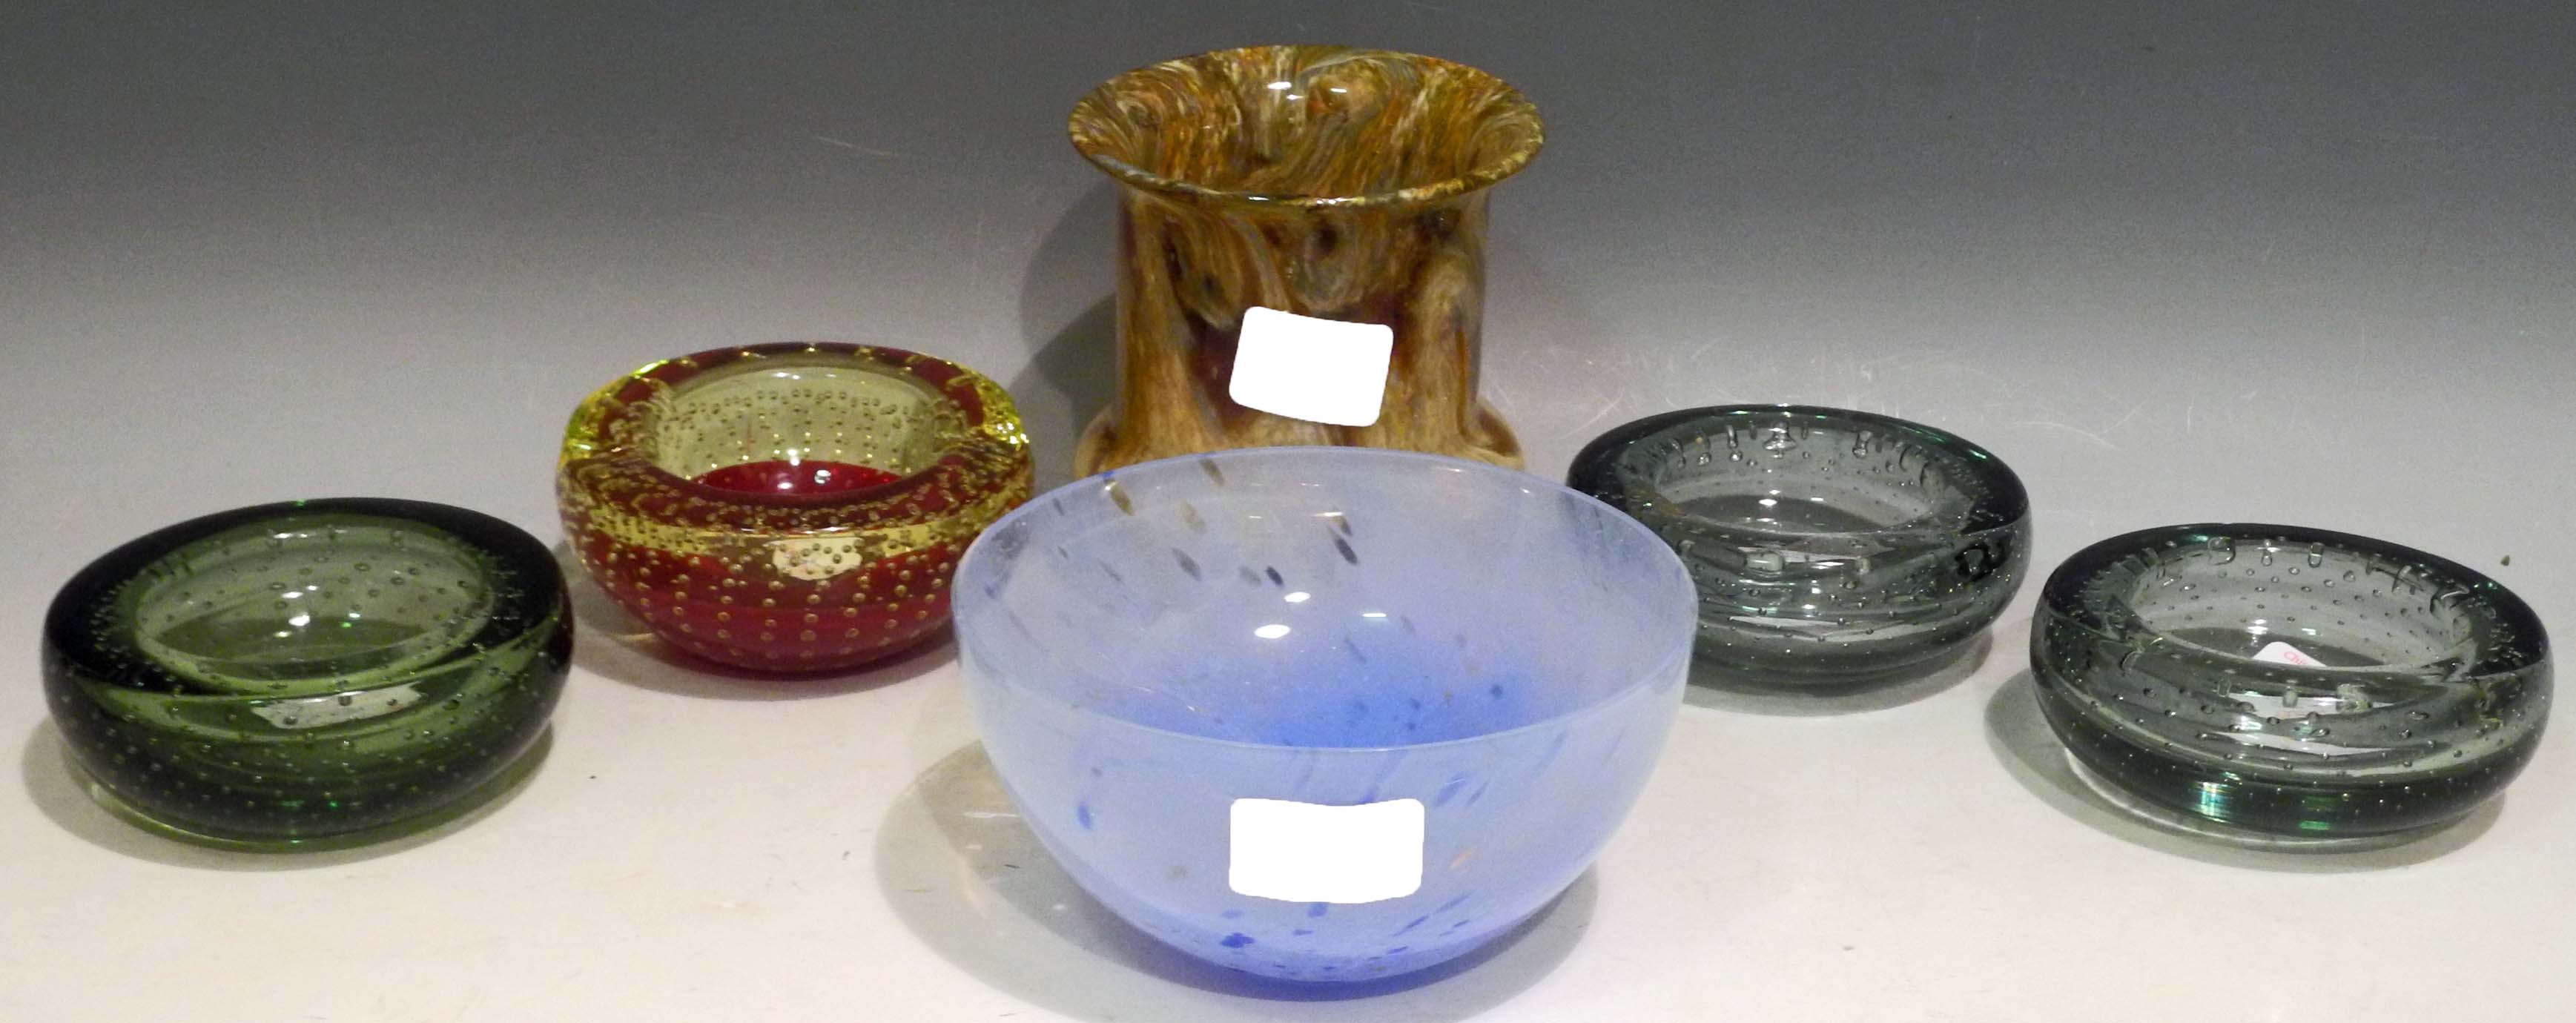 A Caithness glass bowl, four Whitefriars glass ashtrays with bubble inclusions and a "Monart" or "